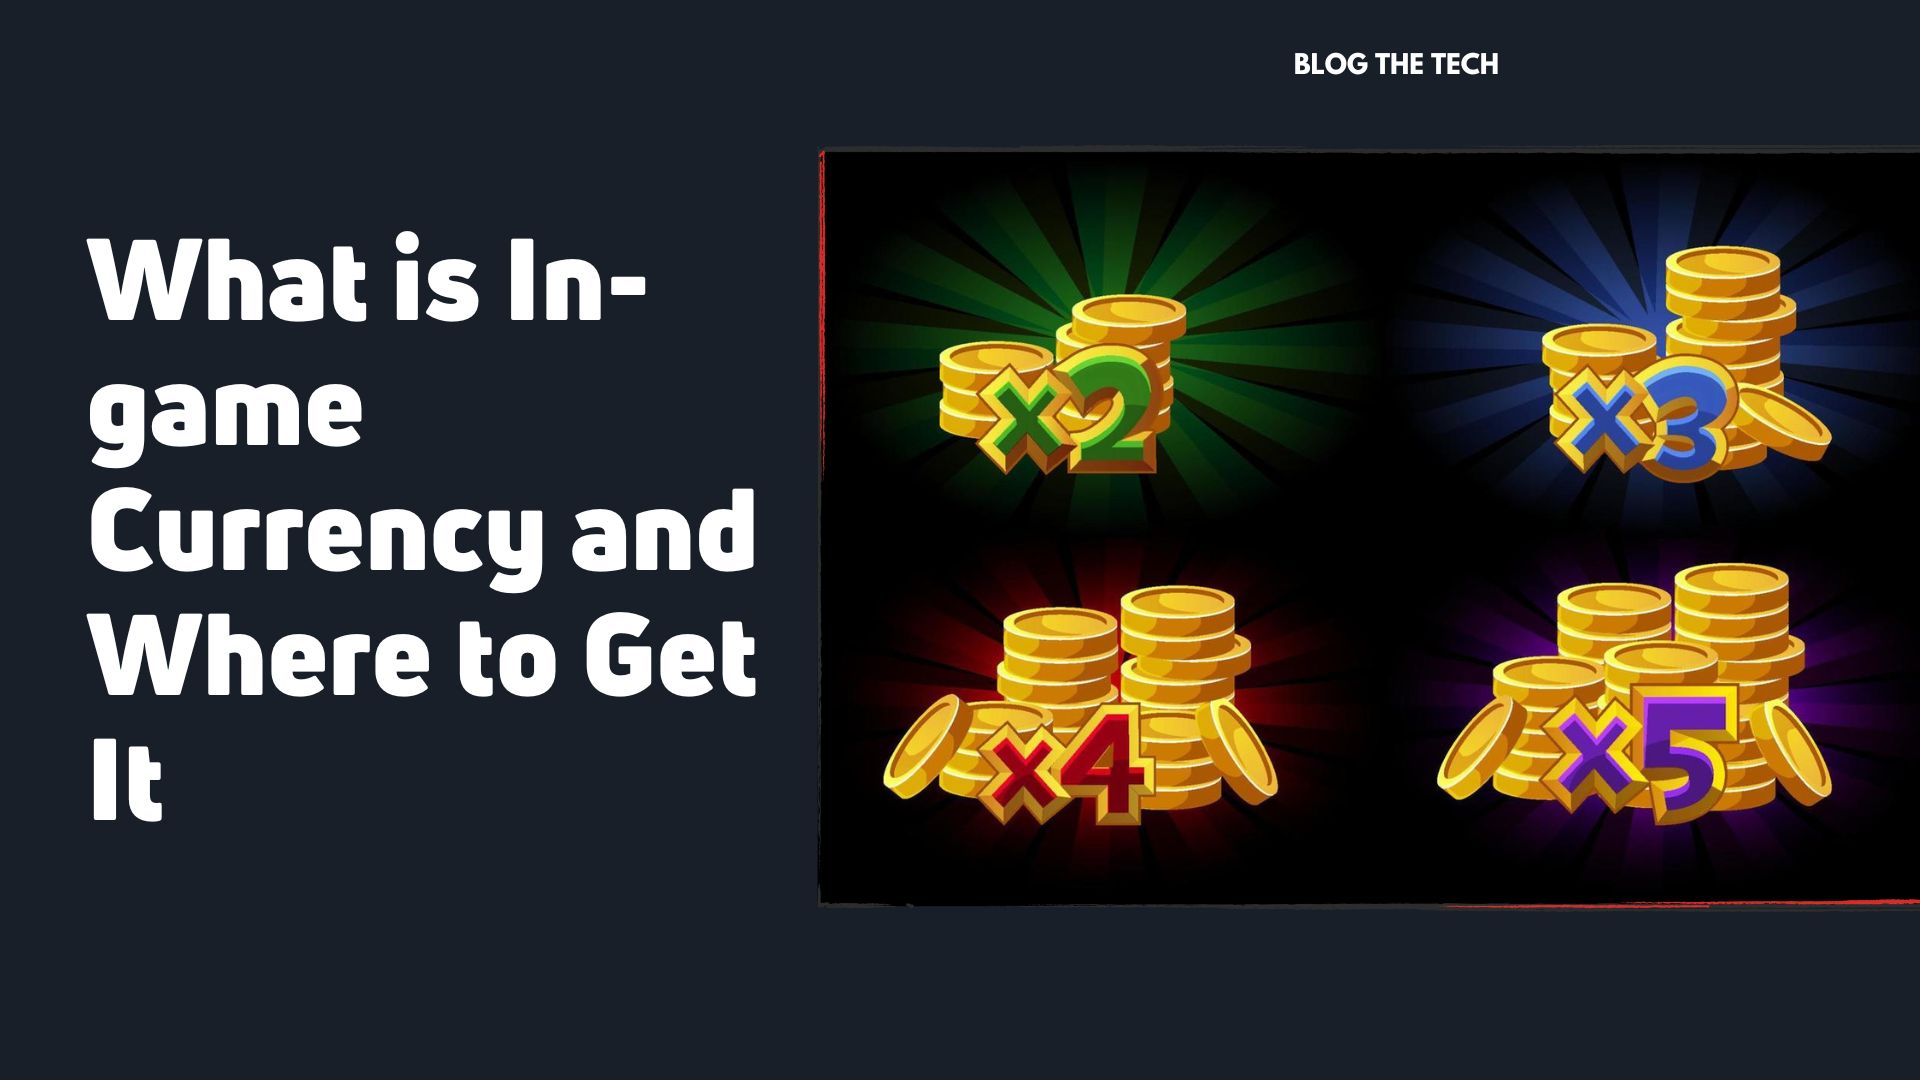 in-game-currency-where-to-get-itin-game-currency-where-to-get-it:featured